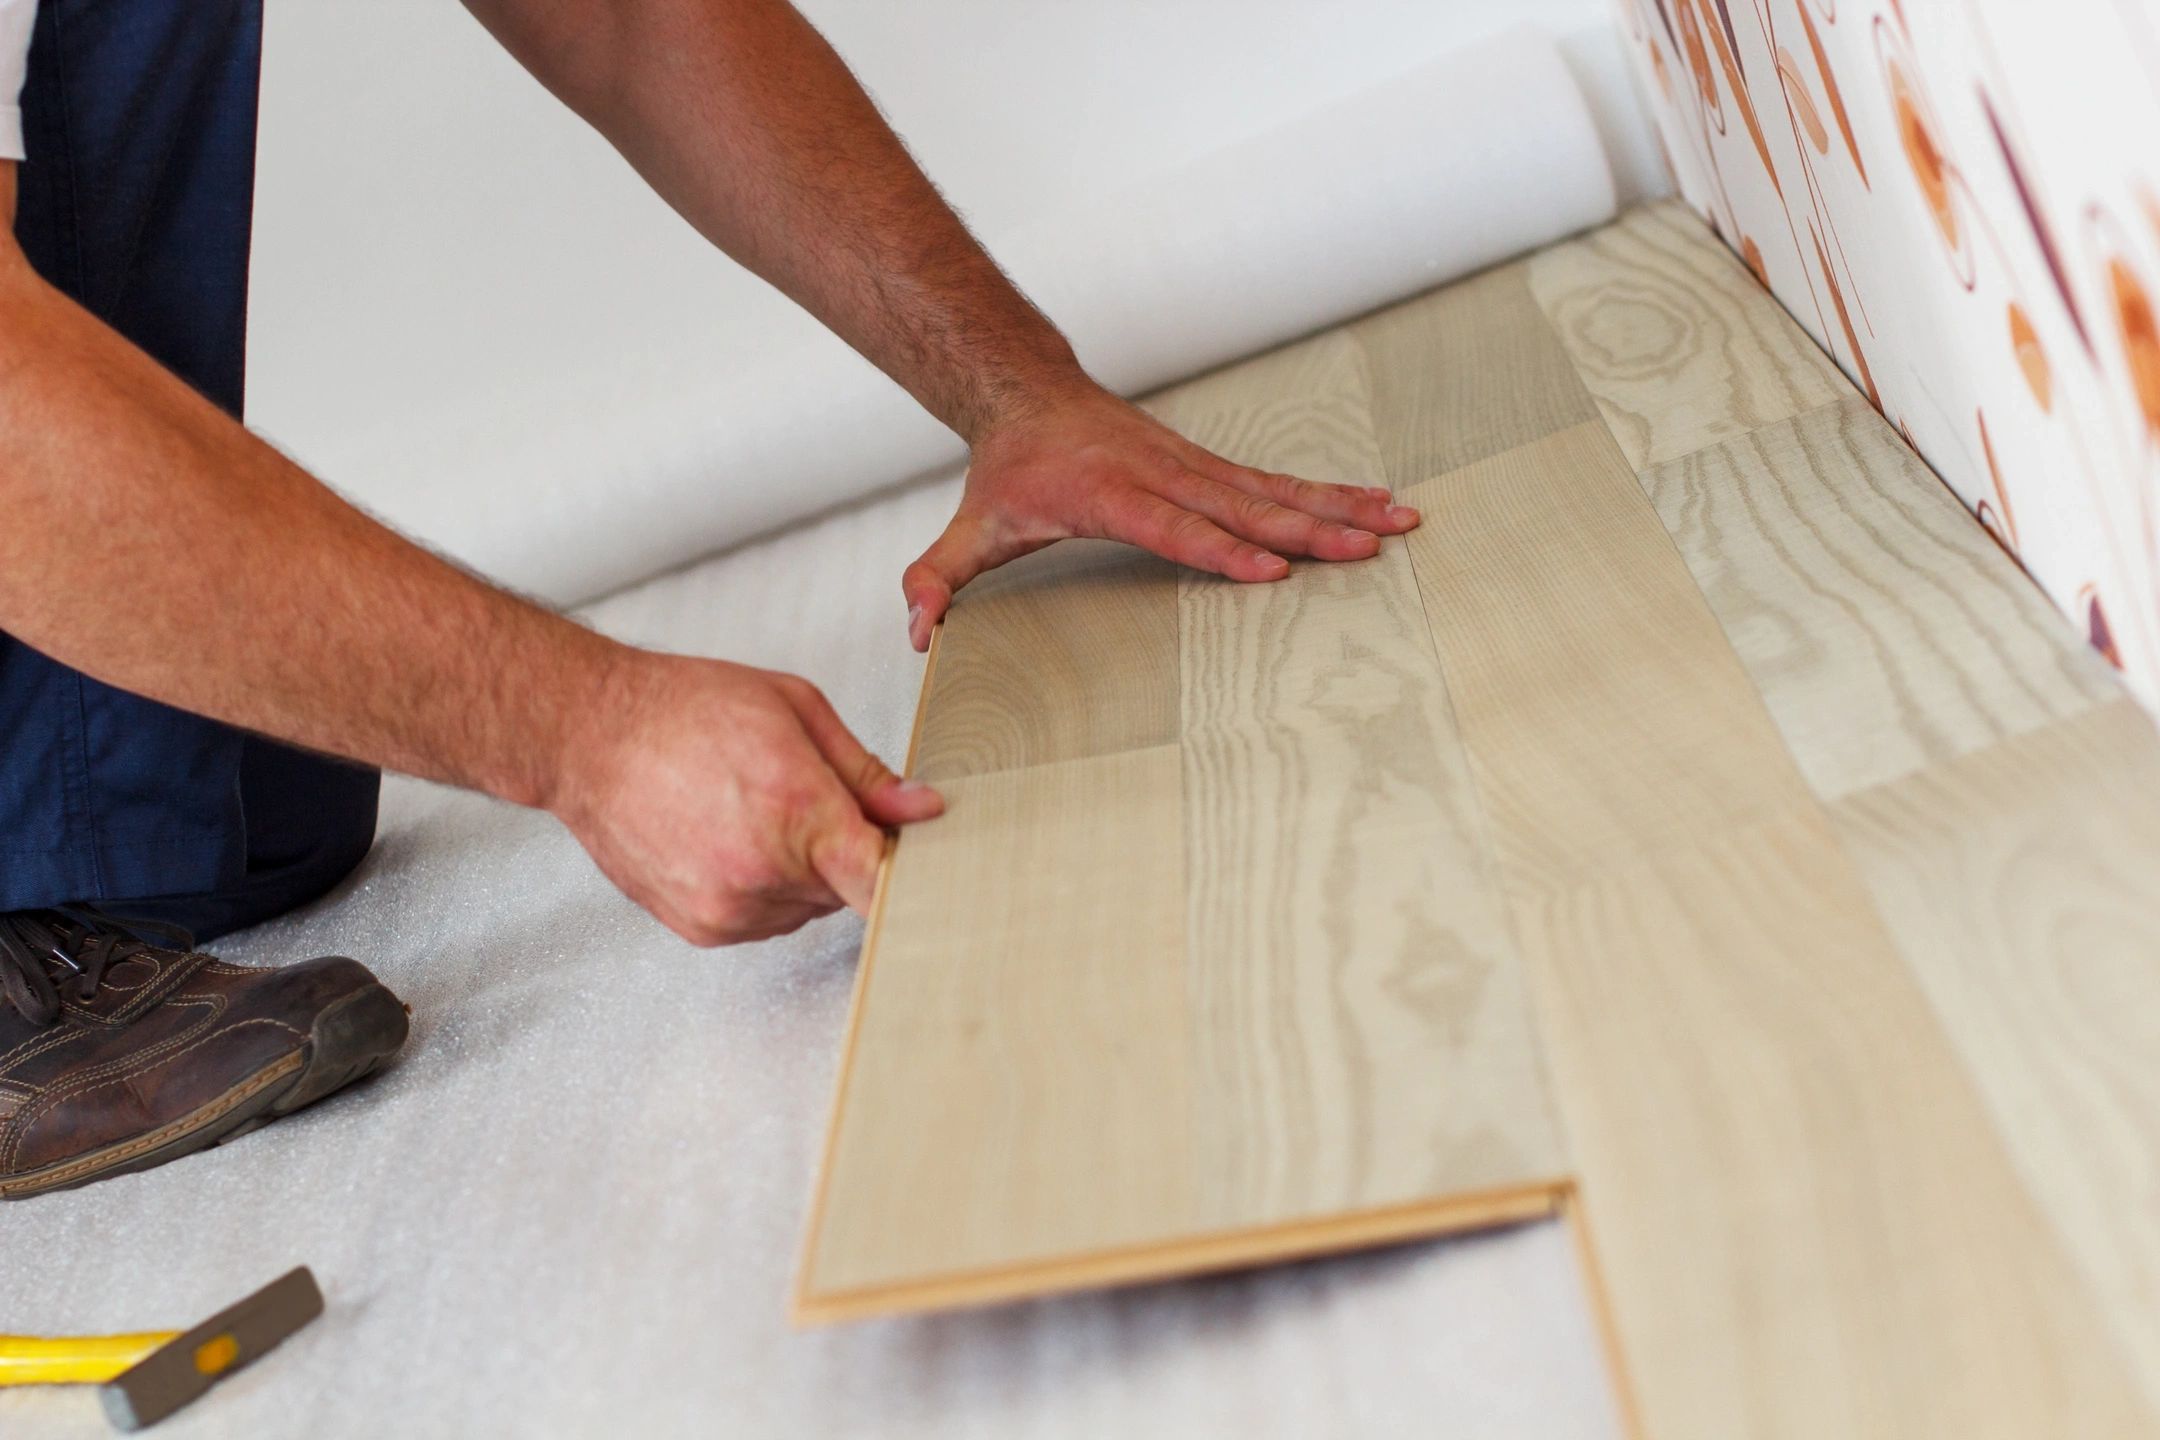 How To Acclimate Laminate Flooring: A DIY Guide